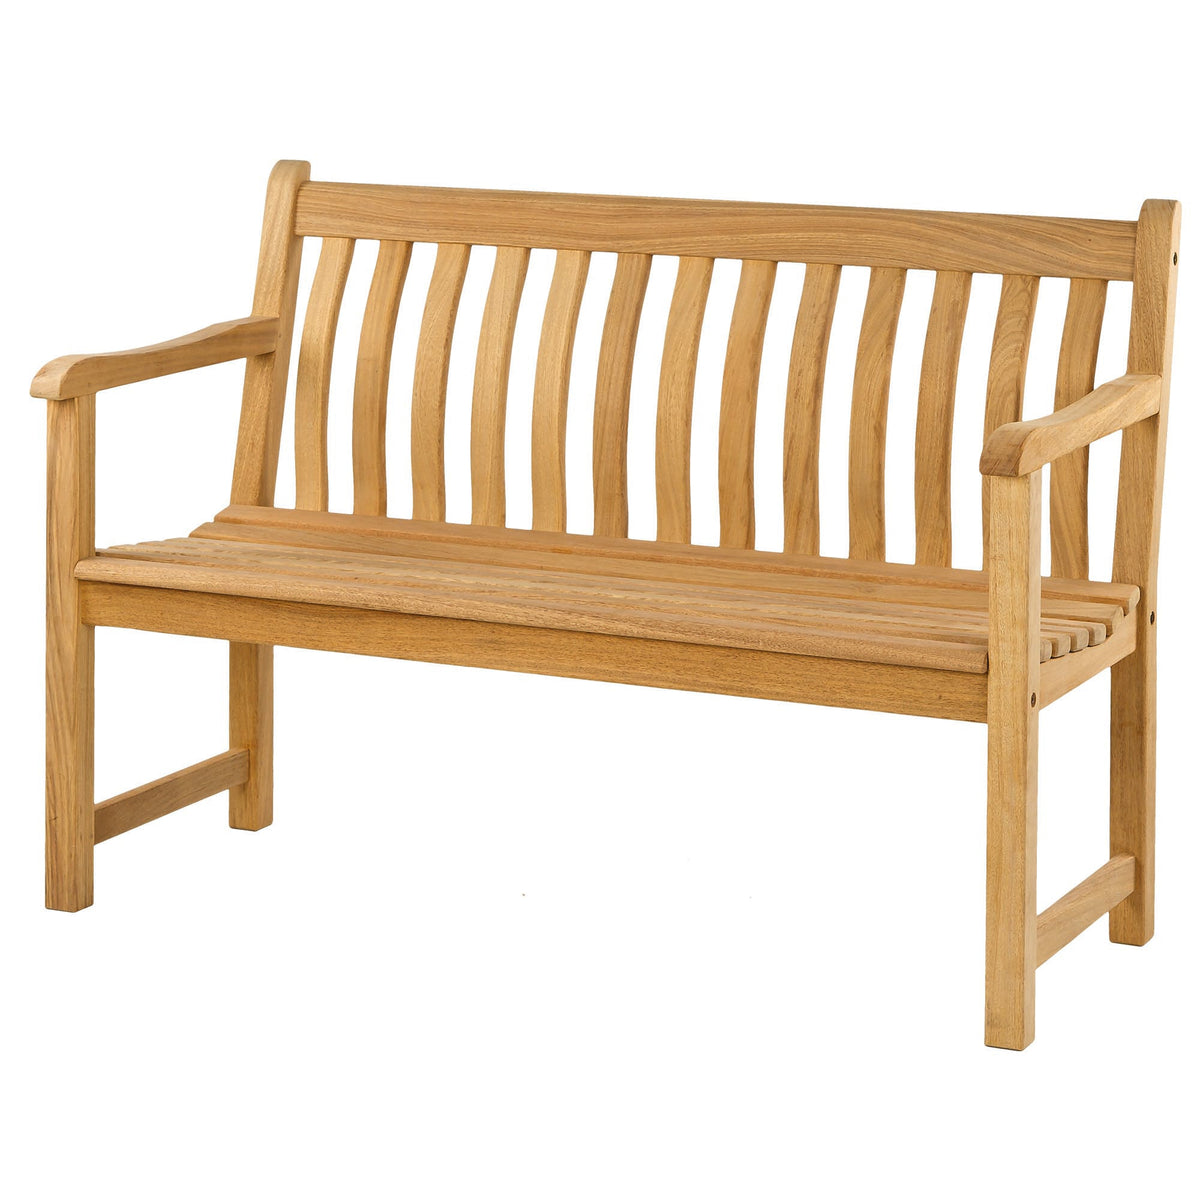 Ex Display Alexander Rose Roble Broadfield Bench 4ft (1.2m)